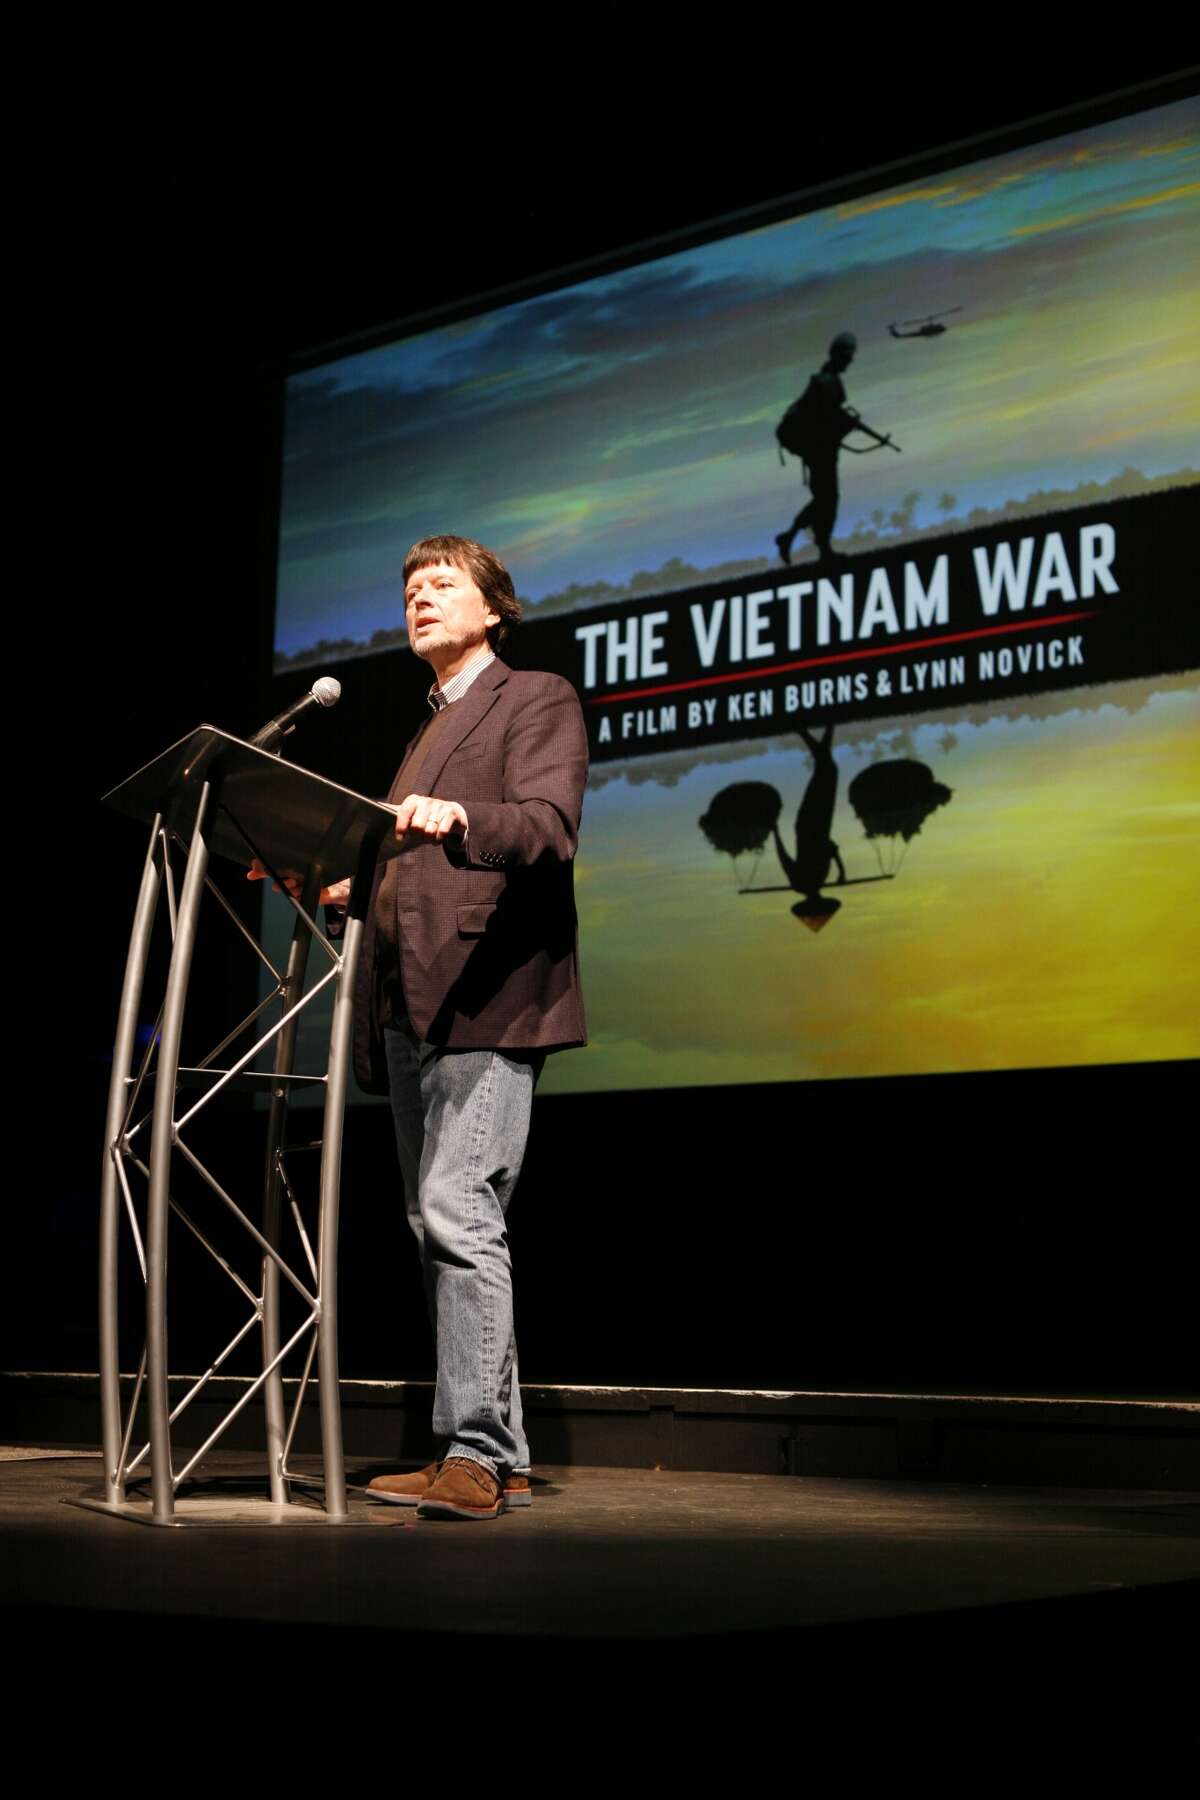 Ken Burns discusses "The Vietnam War," his new 18-hour documentary at the University of Houston's Cullen Performance Hall on April 26, 2017. Photo courtesy of Houston Public Media/John Lewis